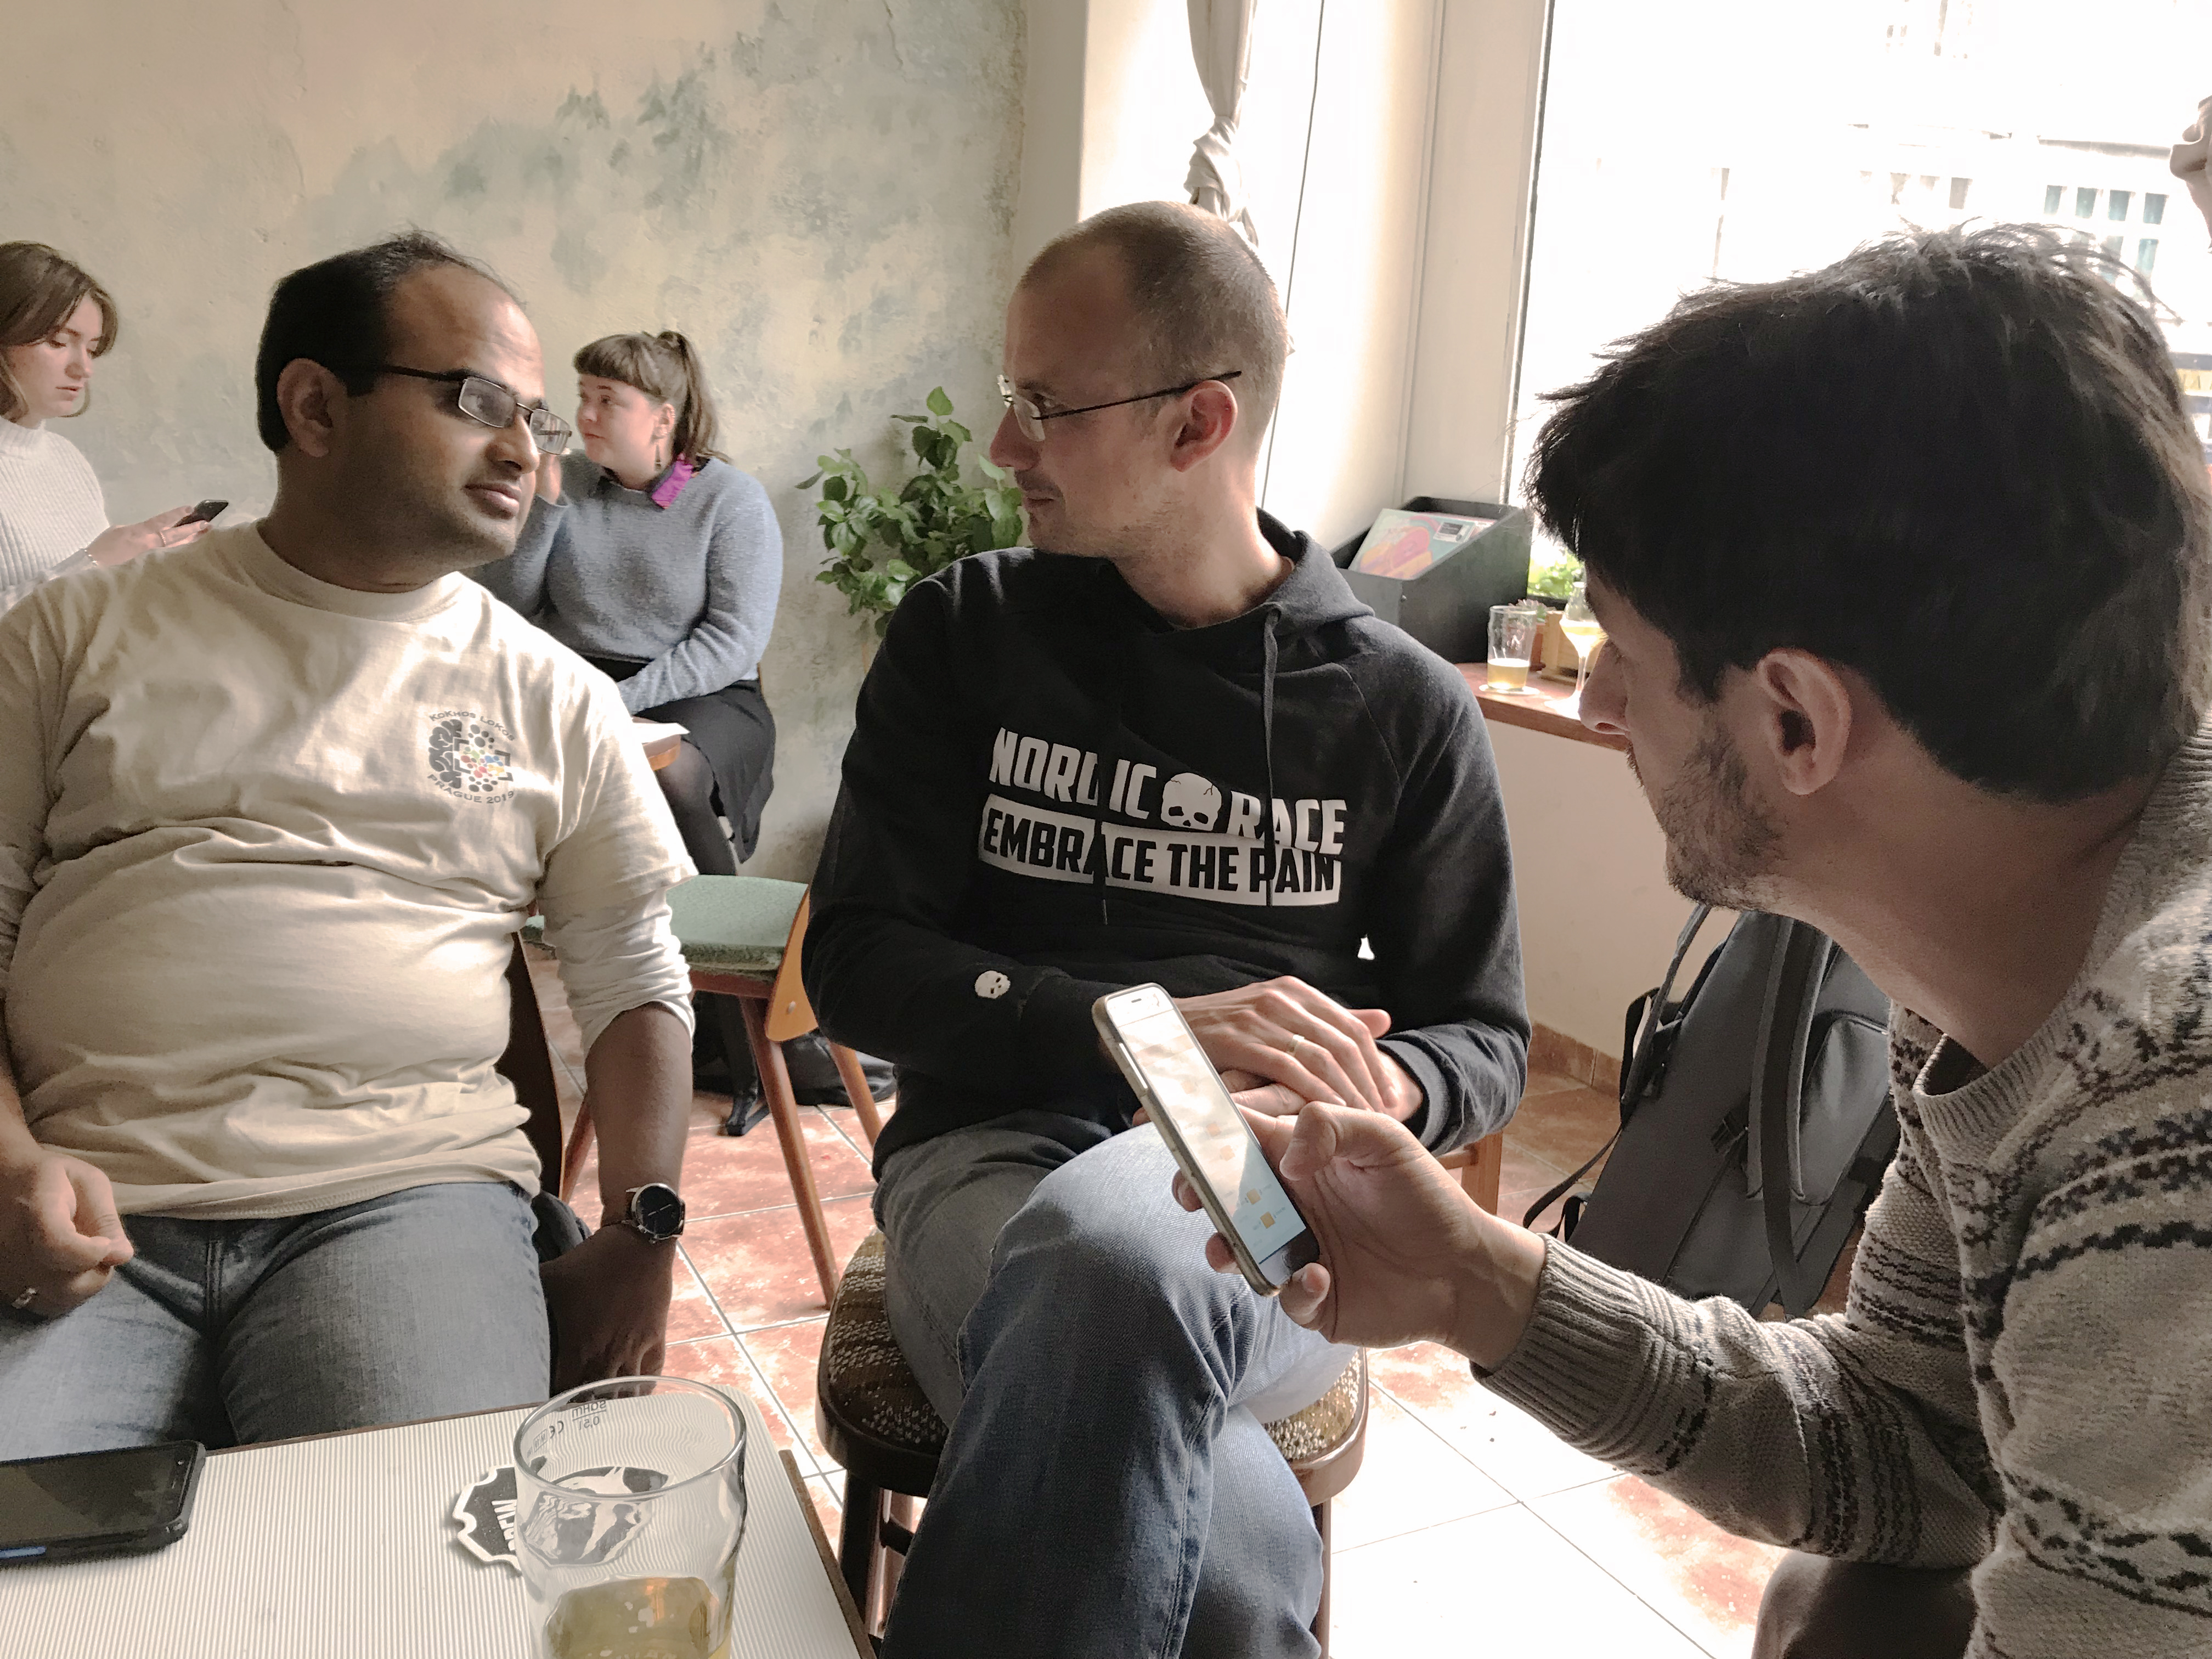 Image 12. Navneet, Kostya and Diego chatting in a café.